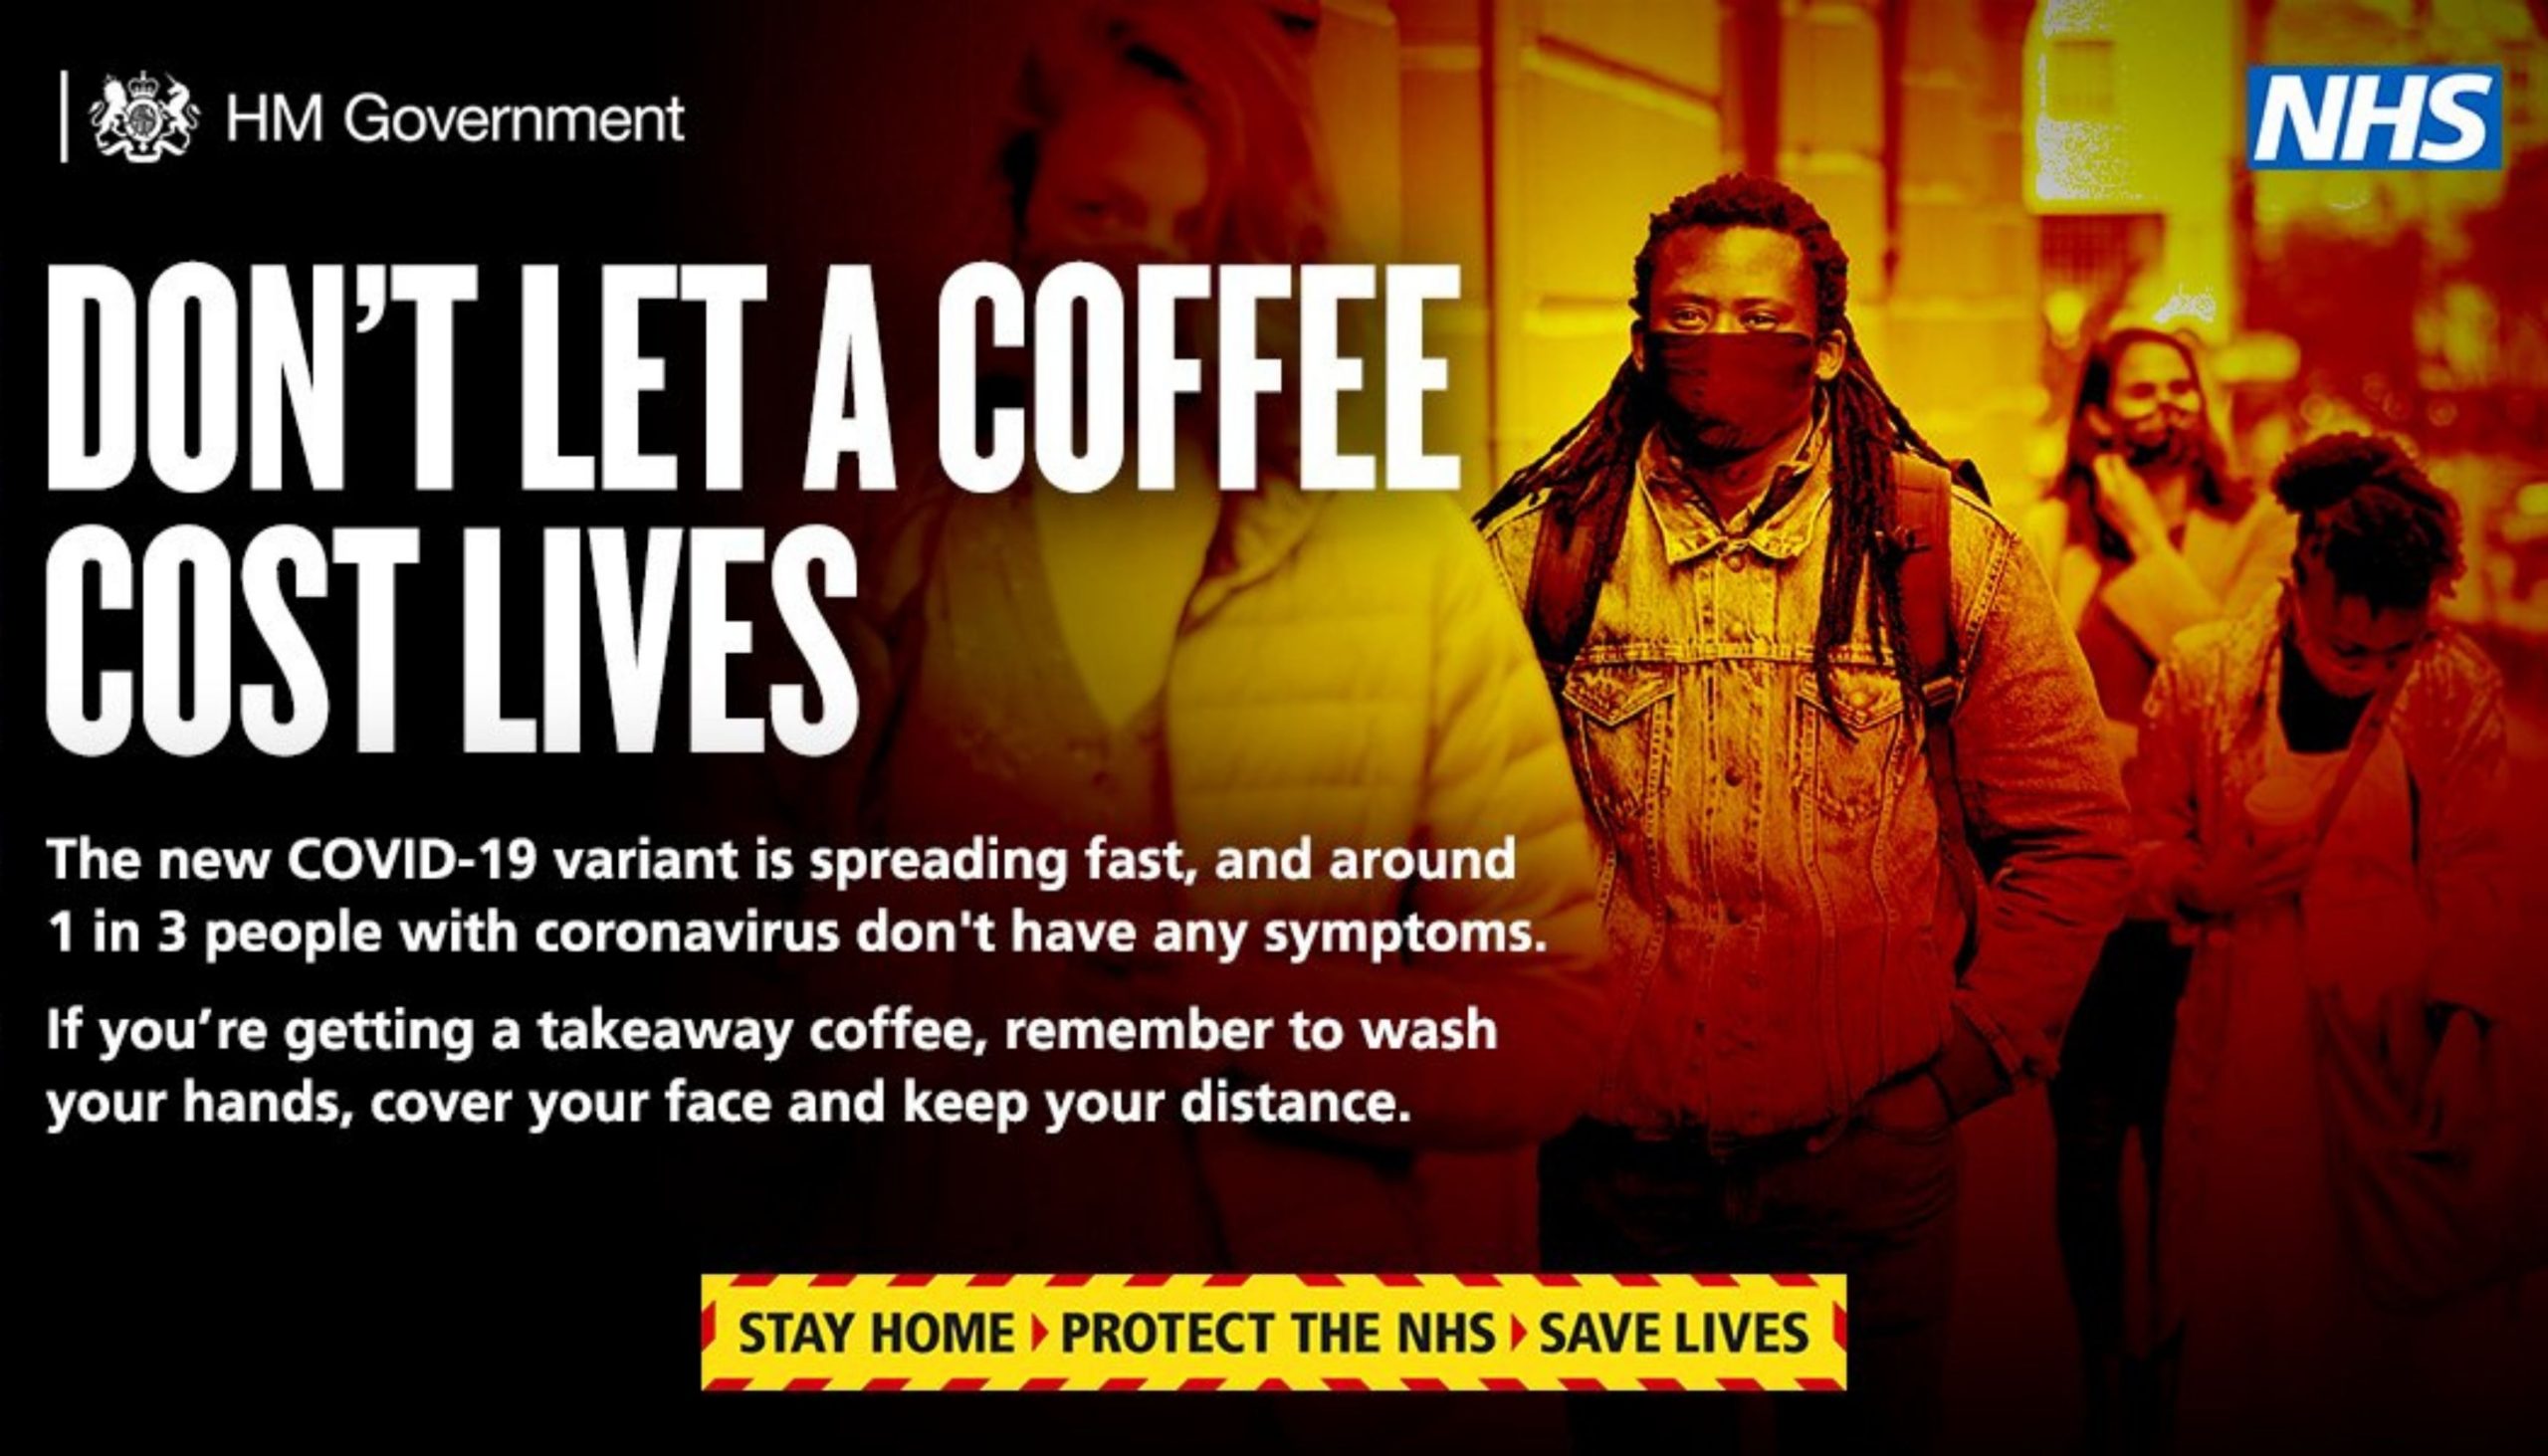 New Government Ad Campaign warns "Don't Let A Coffee Cost Lives"